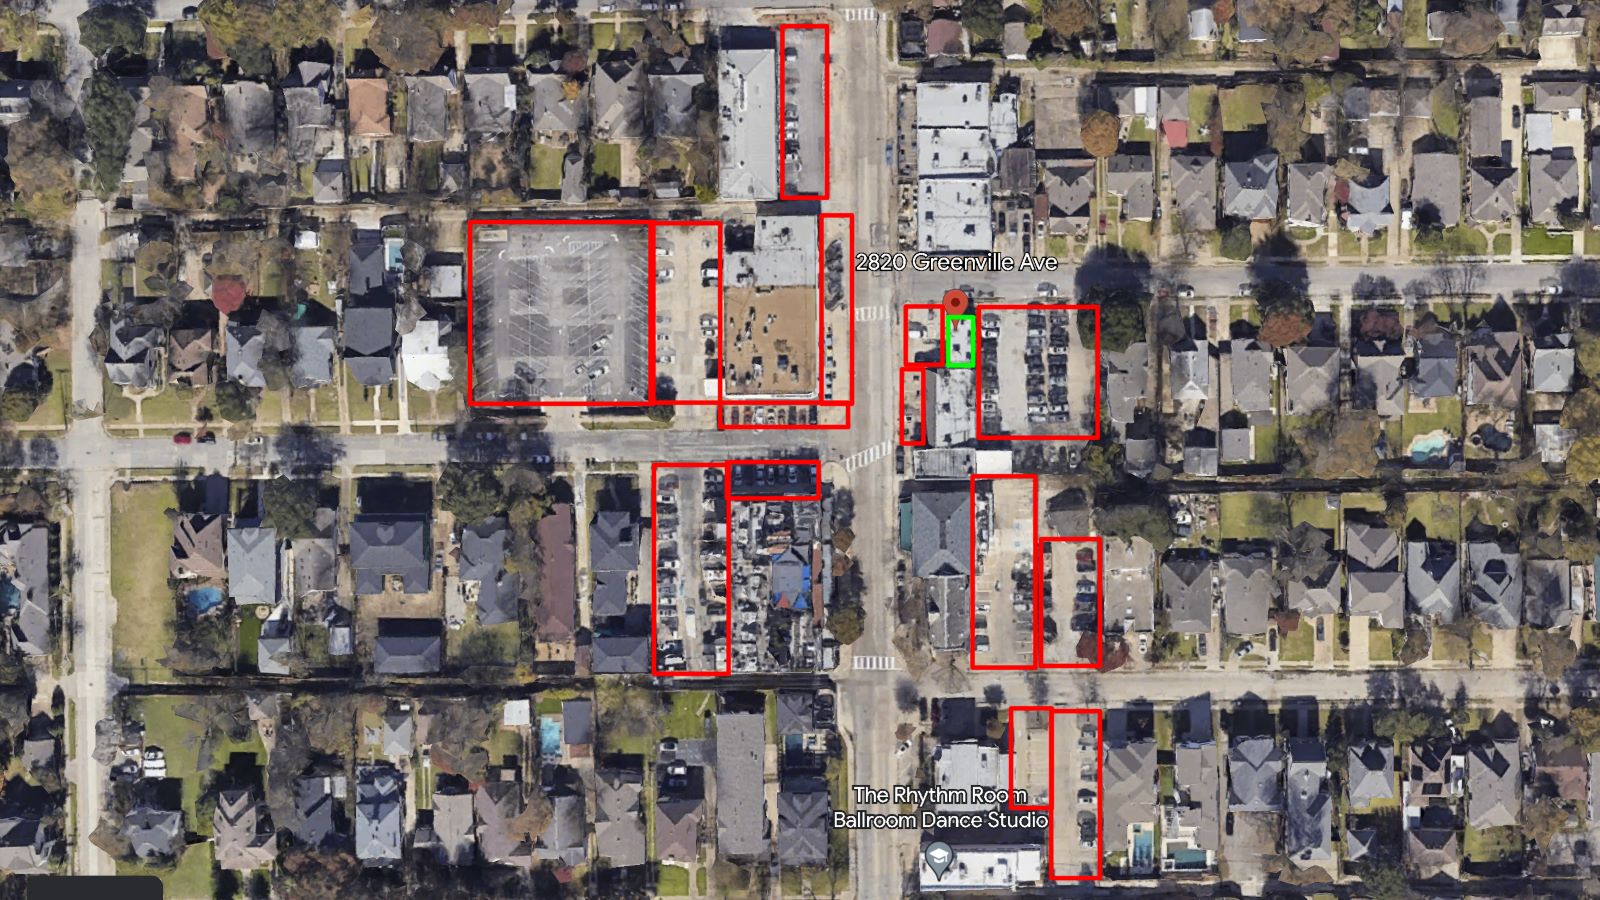 Satellite view of Val's Cheesecake (in green square) on Greenville Ave. Parking lots in red squares.